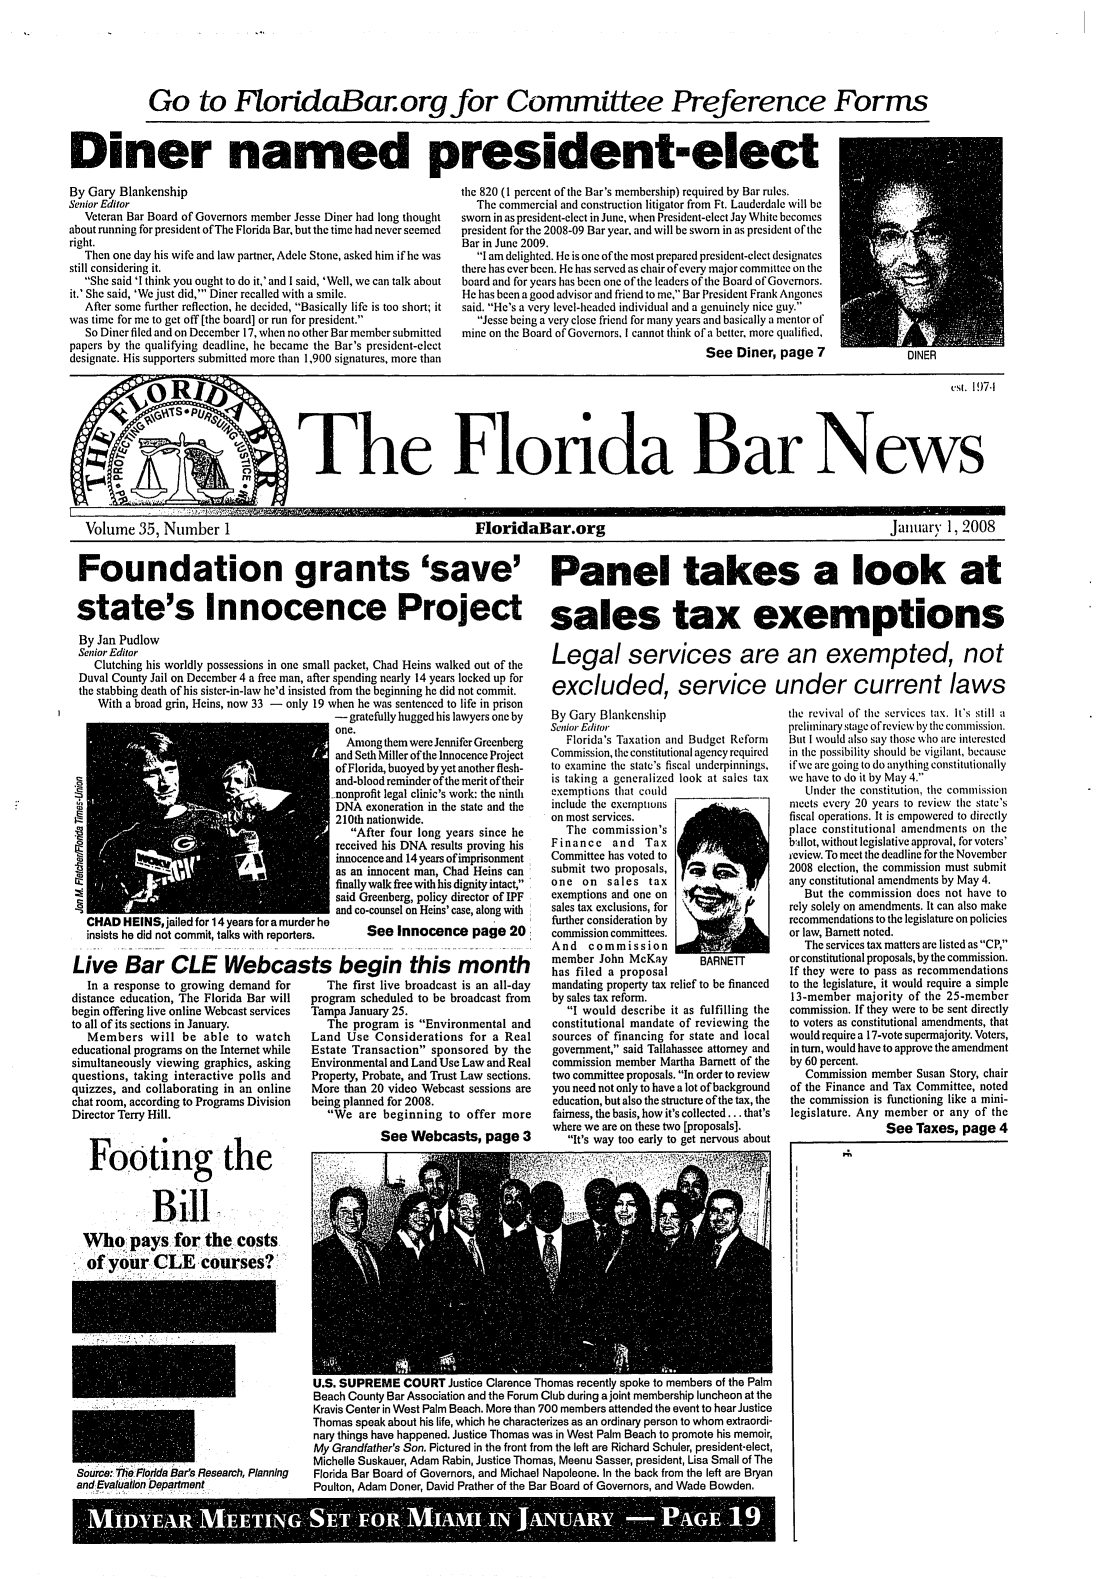 handle is hein.barjournals/flabn0035 and id is 1 raw text is: 






             Go to FloridaBar.org for Committee Preference Forms



Diner named president-elect M


By Gary Blankenship
Senior Editor
   Veteran Bar Board of Governors member Jesse Diner had long thought
about running for president of The Florida Bar, but the time had never seemed
right.
   Then one day his wife and law partner, Adele Stone, asked him if he was
still considering it.
   She said 'I think you ought to do it,' and I said, 'Well, we can talk about
it.' She said, 'We just did,' Diner recalled with a smile.
   After some further reflection, he decided, Basically life is too short; it
was time for me to get off [the board] or run for president.
   So Diner filed and on December 17, when no other Bar member submitted
papers by the qualifying deadline, he became the Bar's president-elect
designate. His supporters submitted more than 1,900 signatures, more than


the 820 (1 percent of the Bar's membership) required by Bar rules.
  The commercial and construction litigator from Ft. Lauderdale will be
sworn in as president-elect in June, when President-elect Jay White becomes
president for the 2008-09 Bar year. and will be sworn in as president of the
Bar in June 2009.
   I am delighted. He is one of the most prepared president-elect designates
there has ever been. He has served as chair of every major committee on the
board and for years has been one of the leaders of the Board of Govemors.
He has been a good advisor and friend to me, Bar President Frank Angones
said. He's a very level-headed individual and a genuinely nice guy.
   Jesse being a very close friend for many years and basically a mentor of
mine on the Board of Governors. I cannot think of a better, more qualified,
                                        See Diner, page 7


                                                                                                                                   es. 19)7-1





cThe Flonda Bar News


Volume 35, Number 1                                              FloridaBar.org                                                     January 1, 2008


Foundation grants 'save' Panel takes a look at


state's Innocence Project sales tax exemptions


By Jan Pudlow
Senior Editor
    Clutching his worldly possessions in one small packet, Chad Heins walked out of the
 Duval County Jail on December 4 a free man, after spending nearly 14 years locked up for
 the stabbing death of his sister-in-law he'd insisted from the beginning he did not commit.
    With a broad grin, Heins, now 33 - only 19 when he was sentenced to life in prison
                                           - gratefully hugged his lawyers one by
                                           one.
                                             Among them were Jennifer Greenberg
                                           and Seth Miller of the Innocence Project
                                           of Florida, buoyed by yet another flesh-
                                           and-blood reminder of the merit of their
                                           .nonprofit legal clinic's work: the ninth
                                           DNA exoneration in the state and the
r210th nationwide.
                                             After four long years since he
                                          received his DNA results proving his
                                          innocence and 14 years of imprisonment
                                          as an innocent man, Chad Heins can
                                          finally walk free with his dignity intact 
                                          said Greenberg, policy director of IPF
                                          and co-counsel on Heins' case, along with
  CHAD HEINS,jailed for 14 years for a murder he
  insists he did not commit, talks with reporters.  See Innocence page 20:

Live Bar CLE Webcasts begin this month
   In a response to growing demand for   The first live broadcast is an all-day
distance education, The Florida Bar will  program scheduled to be broadcast from
begin offering live online Webcast services  Tampa January 25.
to all of its sections in January.       The program is Environmental and
   Members will be able to watch       Land Use Considerations for a Real
educational programs on the Internet while  Estate Transaction sponsored by the
simultaneously viewing graphics, asking Environmental and Land Use Law and Real
questions, taking interactive polls and Property, Probate, and Trust Law sections.
quizzes, and collaborating in an online More than 20 video Webcast sessions are
chat room, according to Programs Division  being planned for 2008.
Director Terry Hill.                      We are beginning to offer more


Footing the


         Bill

    paysforthe costs
of our CLE coUrse?:


Florida Bar's Research, Planning
for Department,


See Webcasts, page 3


Legal services are an exempted, not

excluded, service under current laws


By Gary Blankenship
Senior Editor
   Florida's Taxation and Budget Reform
Commission, the constitutional agency required
to examine the state's fiscal underpinnings,
is taking a generalized look at sales tax
exemptions that could
include the exemptions
on most services.
   The commission's
Finance and Tax
Committee has voted to
submit two proposals,
one on sales tax
exemptions and one on
sales tax exclusions, for
further consideration by
commission committees.
And   commission
member John McKay       BARNETT
has filed a proposal
mandating property tax relief to be financed
by sales tax reform.
   I would describe it as fulfilling the
constitutional mandate of reviewing the
sources of financing for state and local
government, said Tallahassee attorney and
commission member Martha Barnett of the
two committee proposals. In order to review
you need not only to have a lot of background
education, but also the structure of the tax, the
fairness, the basis, how it's collected... that's
where we are on these two [proposals].
   It's way too early to get nervous about


U.S. SUPREME COURT Justice Clarence Thomas recently spoke to members of the Palm
Beach County Bar Association and the Forum Club during a joint membership luncheon at the
Kravis Center in West Palm Beach. More than 700 members attended the event to hear Justice
Thomas speak about his life, which he characterizes as an ordinary person to whom extraordi-
nary things have happened. Justice Thomas was in West Palm Beach to promote his memoir,
My Grandfather's Son. Pictured in the front from the left are Richard Schuler, president-elect,
Michelle Suskauer, Adam Rabin, Justice Thomas, Meenu Sasser, president, Lisa Small of The
Florida Bar Board of Governors, and Michael Napoleone. In the back from the left are Bryan
Poulton, Adam Doner, David Prather of the Bar Board of Governors, and Wade Bowden.


S MDYARMEIG  E:FR.almt NANU  AG-9


the revival of the services tax. It's still a
preliminary stage of review by the commission.
But I would also say those who are interested
in the possibility should be vigilant, because
if we are going to do anything constitutionally
we have to do it by May 4.
   Under the constitution, the commission
niects every 20 years to review the state's
fiscal operations. It is empowered to directly
place constitutional amendments on the
ballot, without legislative approval, for voters'
review. To meet the deadline for the November
2008 election, the commission must submit
any constitutional amendments by May 4.
   But the commission does not have to
rely solely on amendments. It can also make
recommendations to the legislature on policies
or law, Barnett noted.
   The services tax matters are listed as CP,
or constitutional proposals, by the commission.
If they were to pass as recommendations
to the legislature, it would require a simple
13-member majority of the 25-member
commission. If they were to be sent directly
to voters as constitutional amendments, that
would require a 17-vote supermajority. Voters,
in turn, would have to approve the amendment
by 60 percent.
   Commission member Susan Story, chair
of the Finance and Tax Committee, noted
the commission is functioning like a mini-
legislature. Any member or any of the
                See Taxes, page 4


